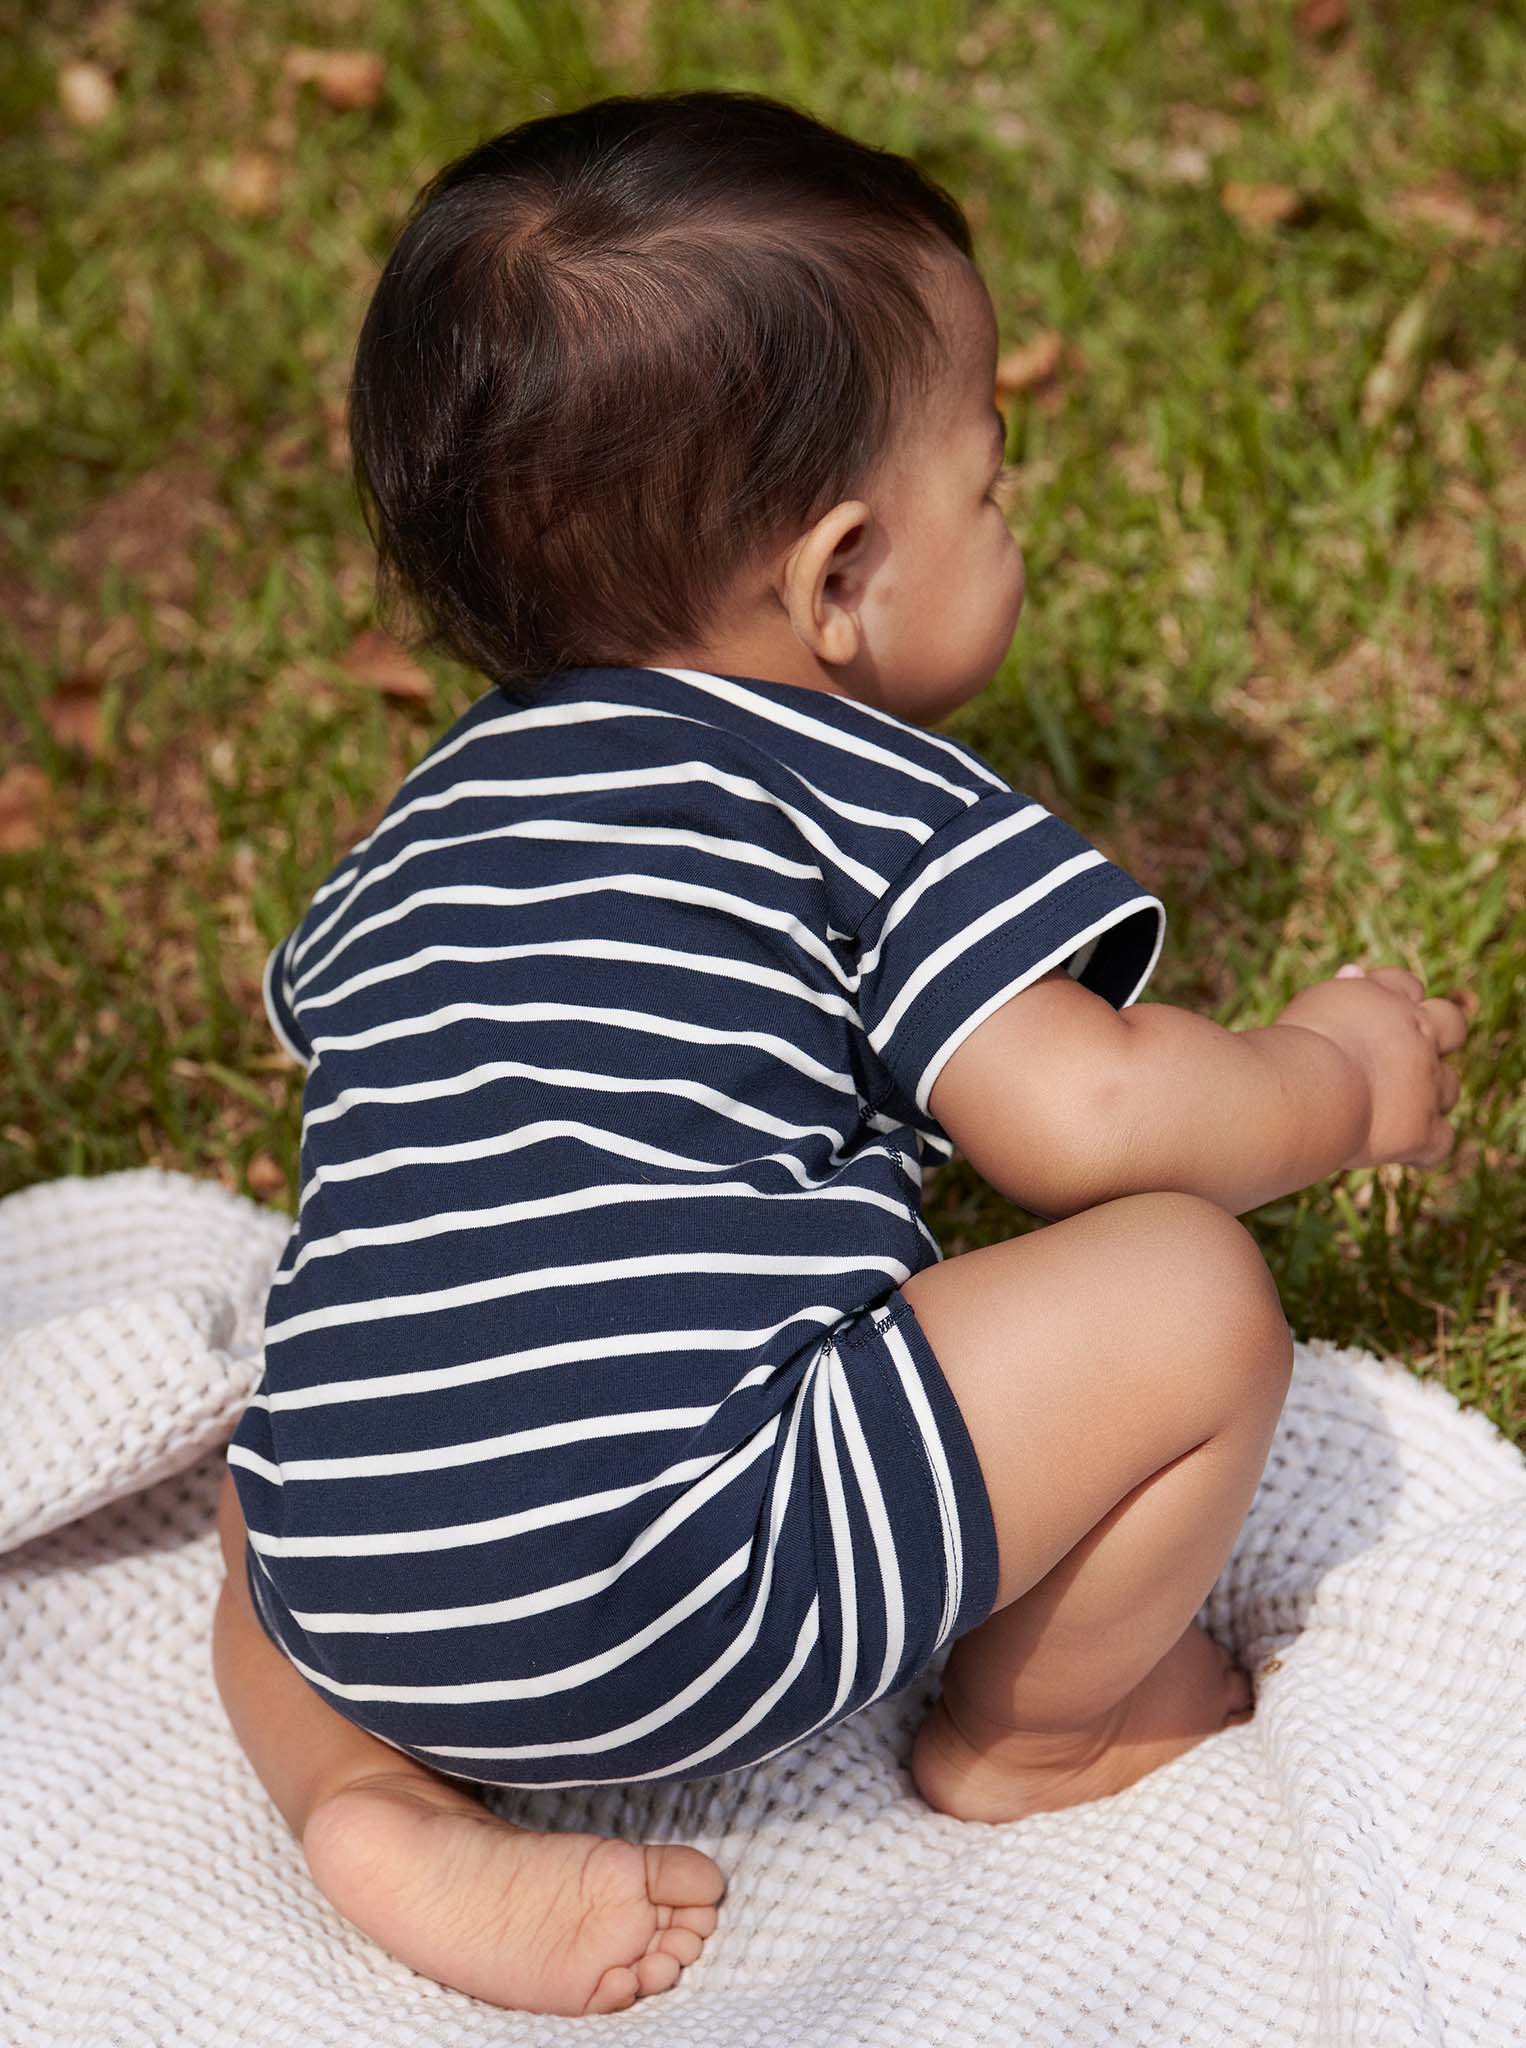 Striped Navy Newborn Baby Romper from Polarn O. Pyret Kidswear. Made using sustainable sourced materials.